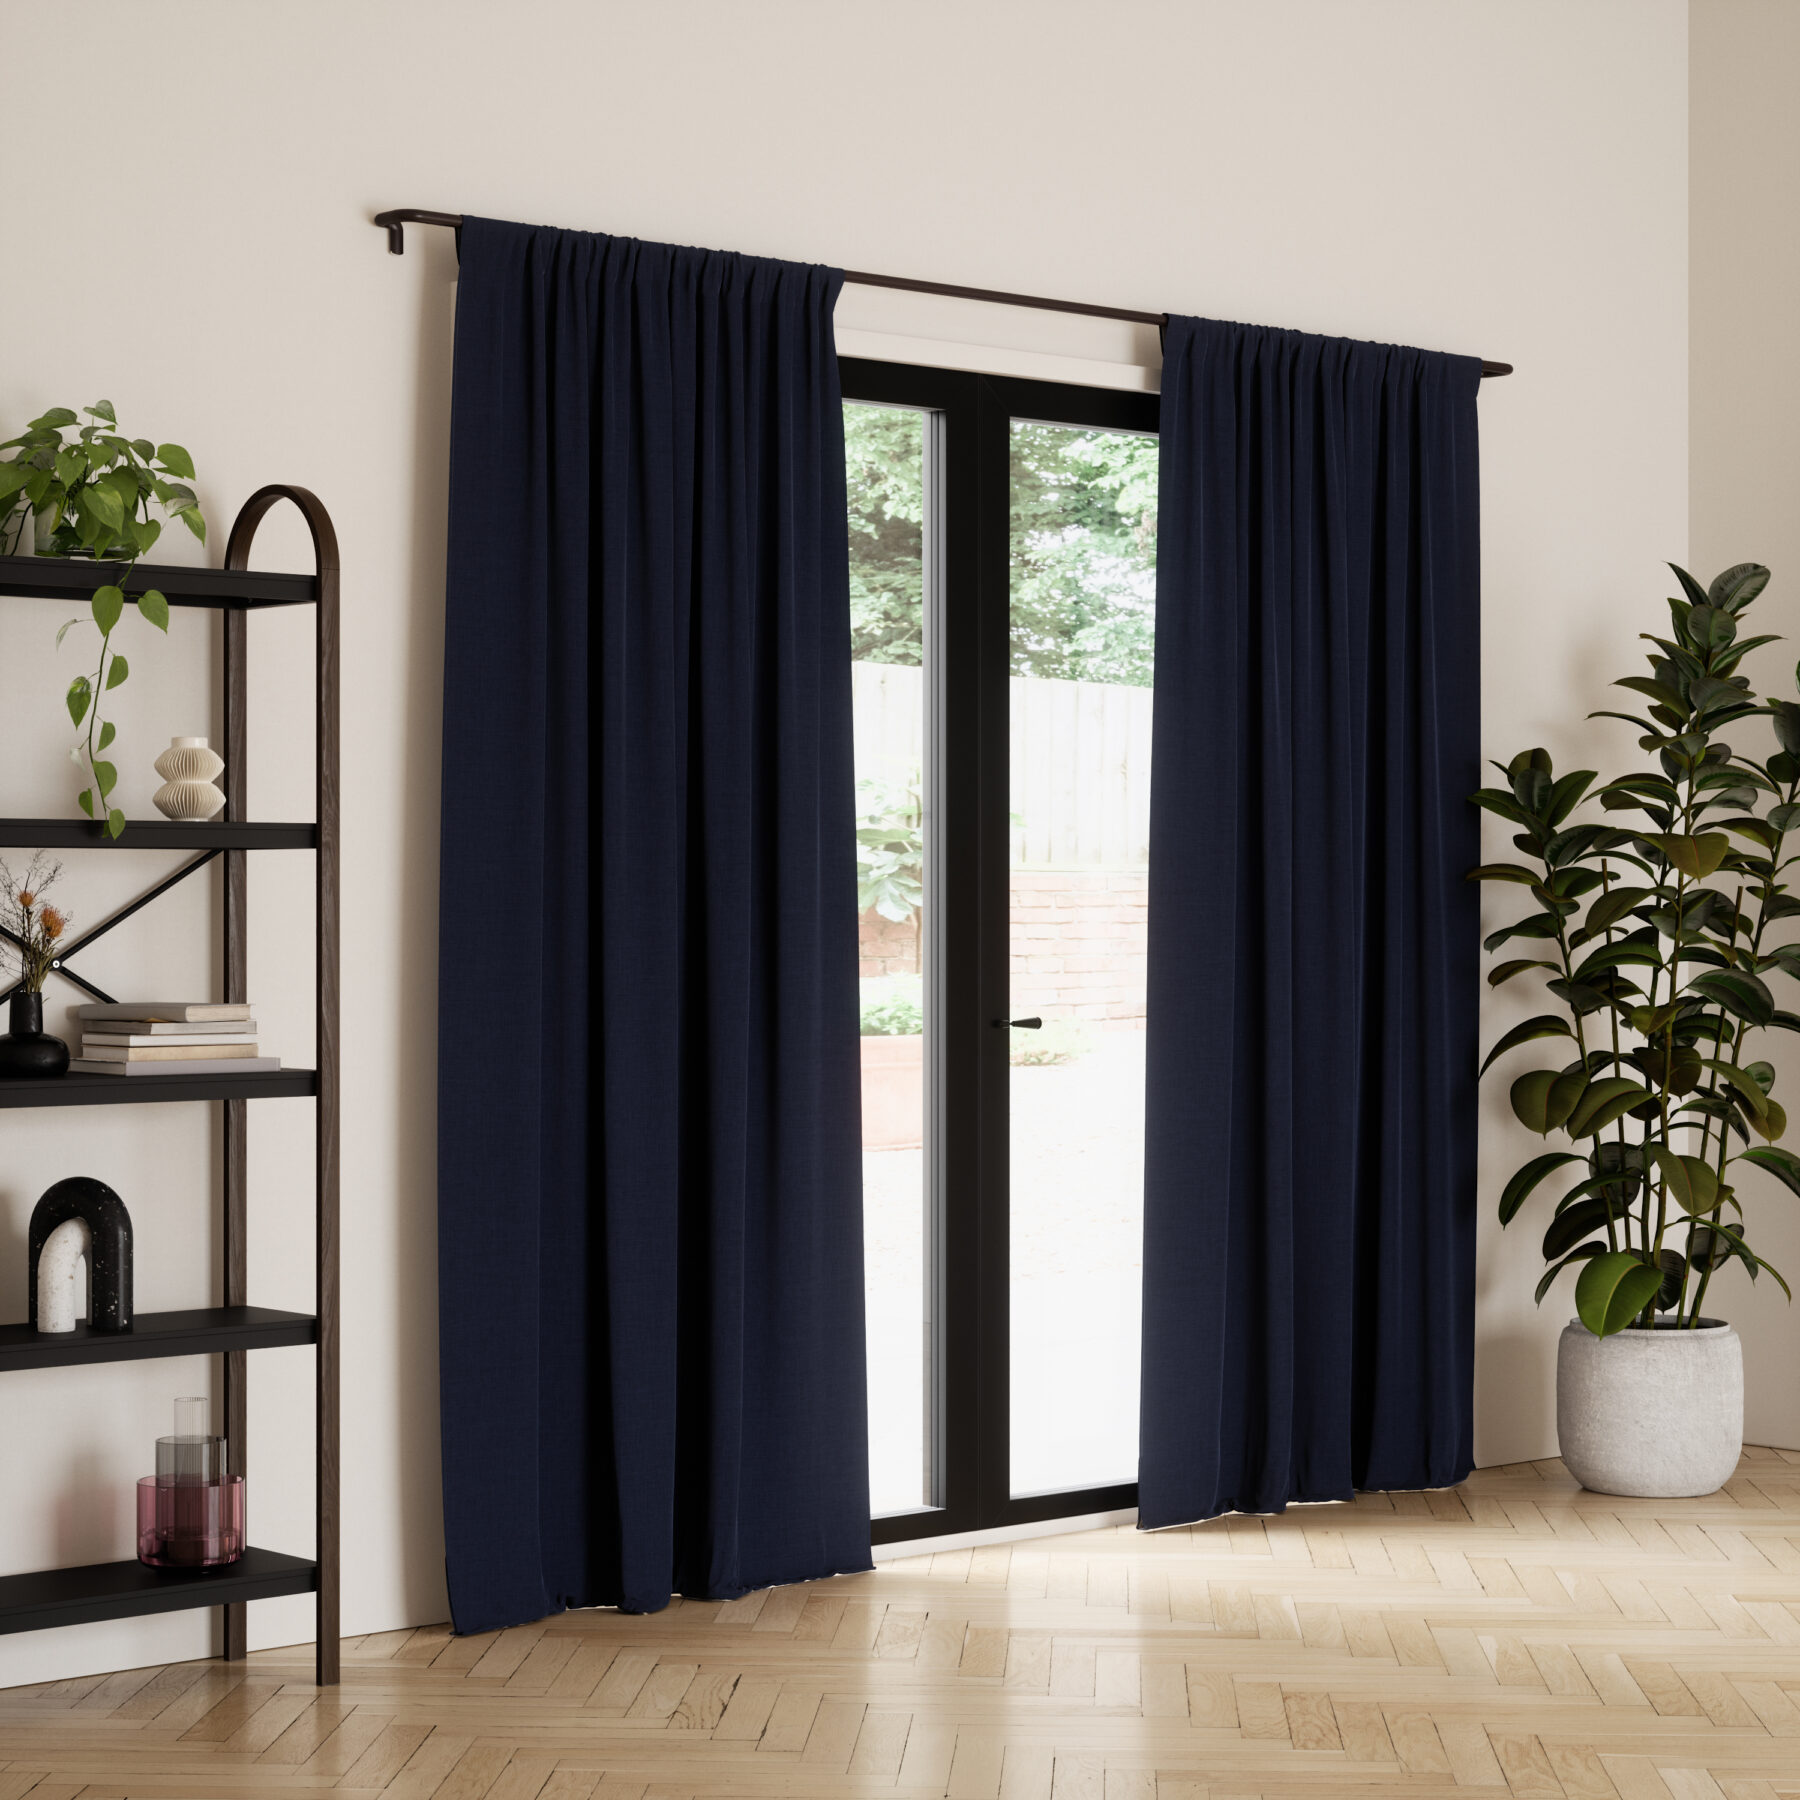 Create a complete blackout room with Twilight Blackout Panels. These unique window solutions pair with any of our bestselling Twilight Blackout Rods to help elevate and complete any window aesthetic in your home. Made of 100% polyester material and pocket top tabs gives you maximum blackout coverage and no top light spill. This set of two curtains are available in multiple lengths to best suit your space. Pair with our Twilight blackout curtain rod for a maximum blackout setup.